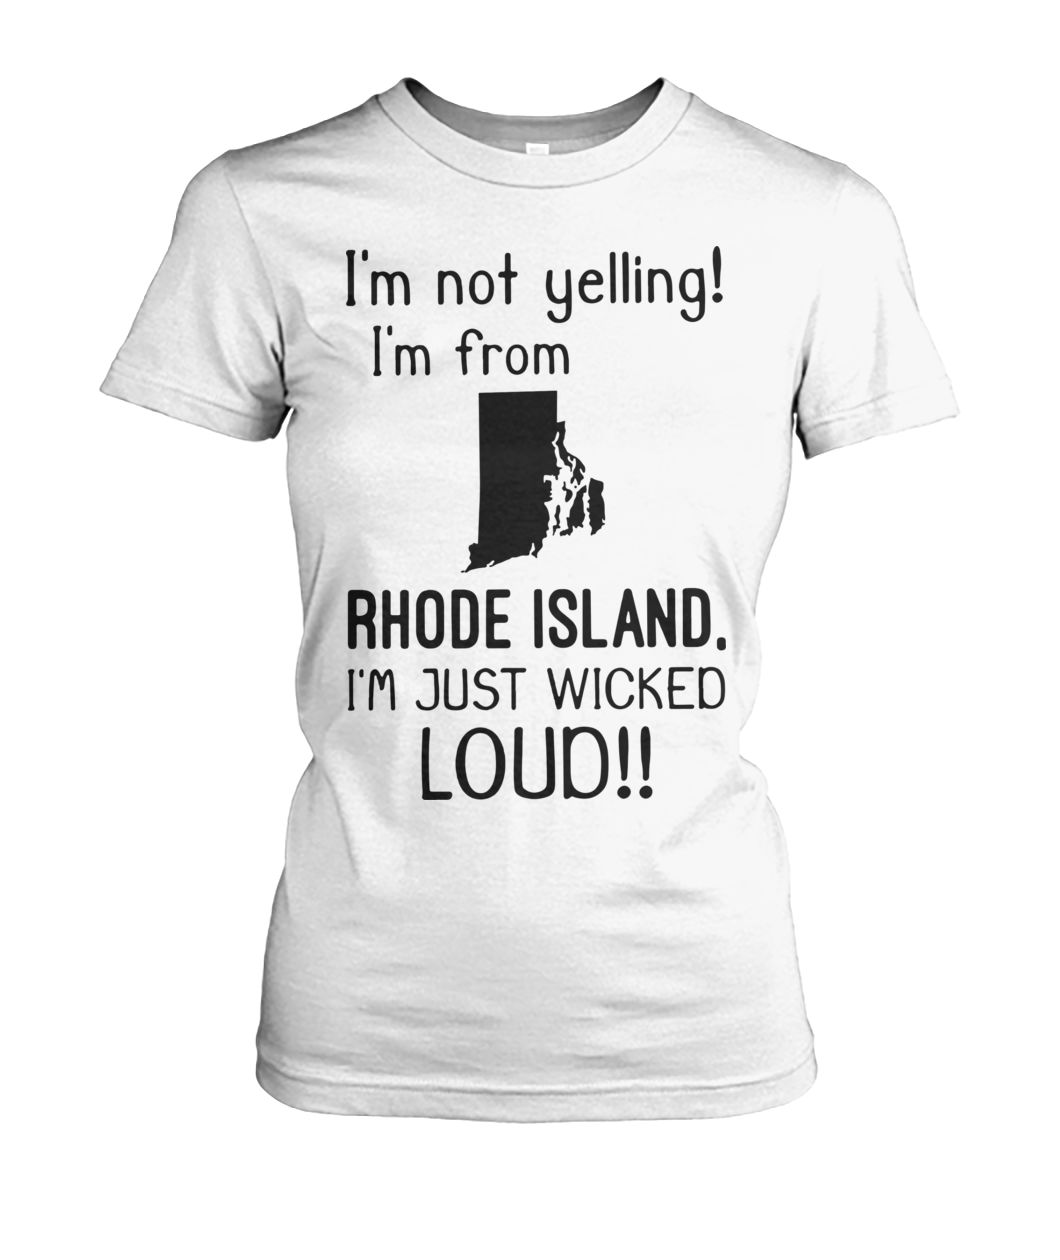 I'm not yelling I am from rhode island I'm just wicked loud women's crew tee